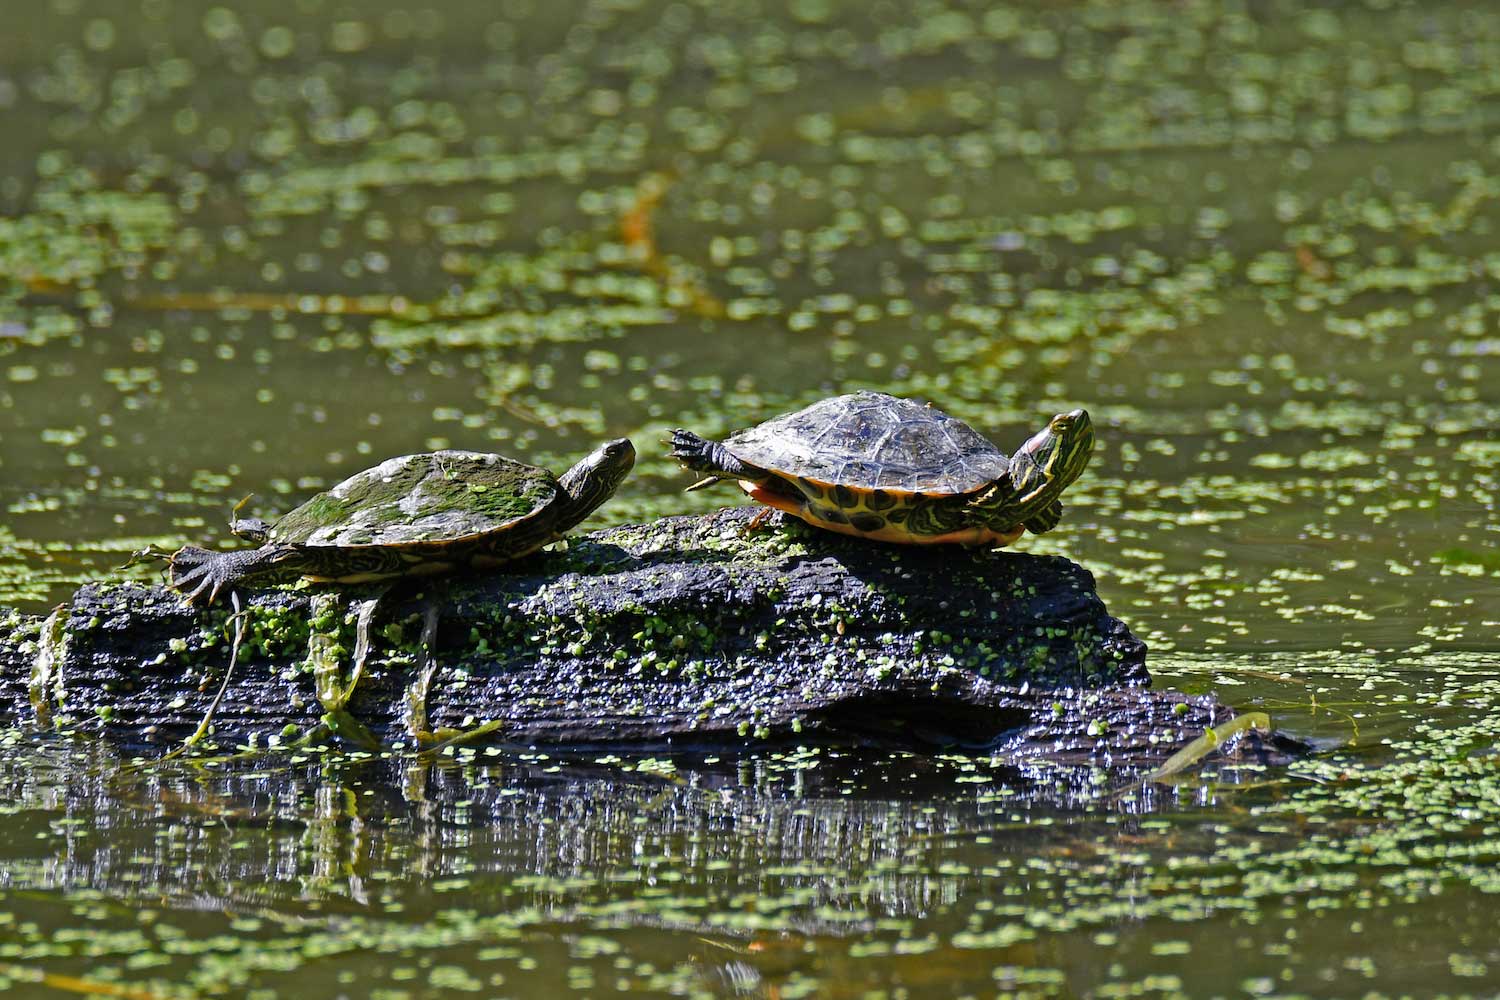 Two painted turtles on a log in a pond filled with duckweed and other vegetation.